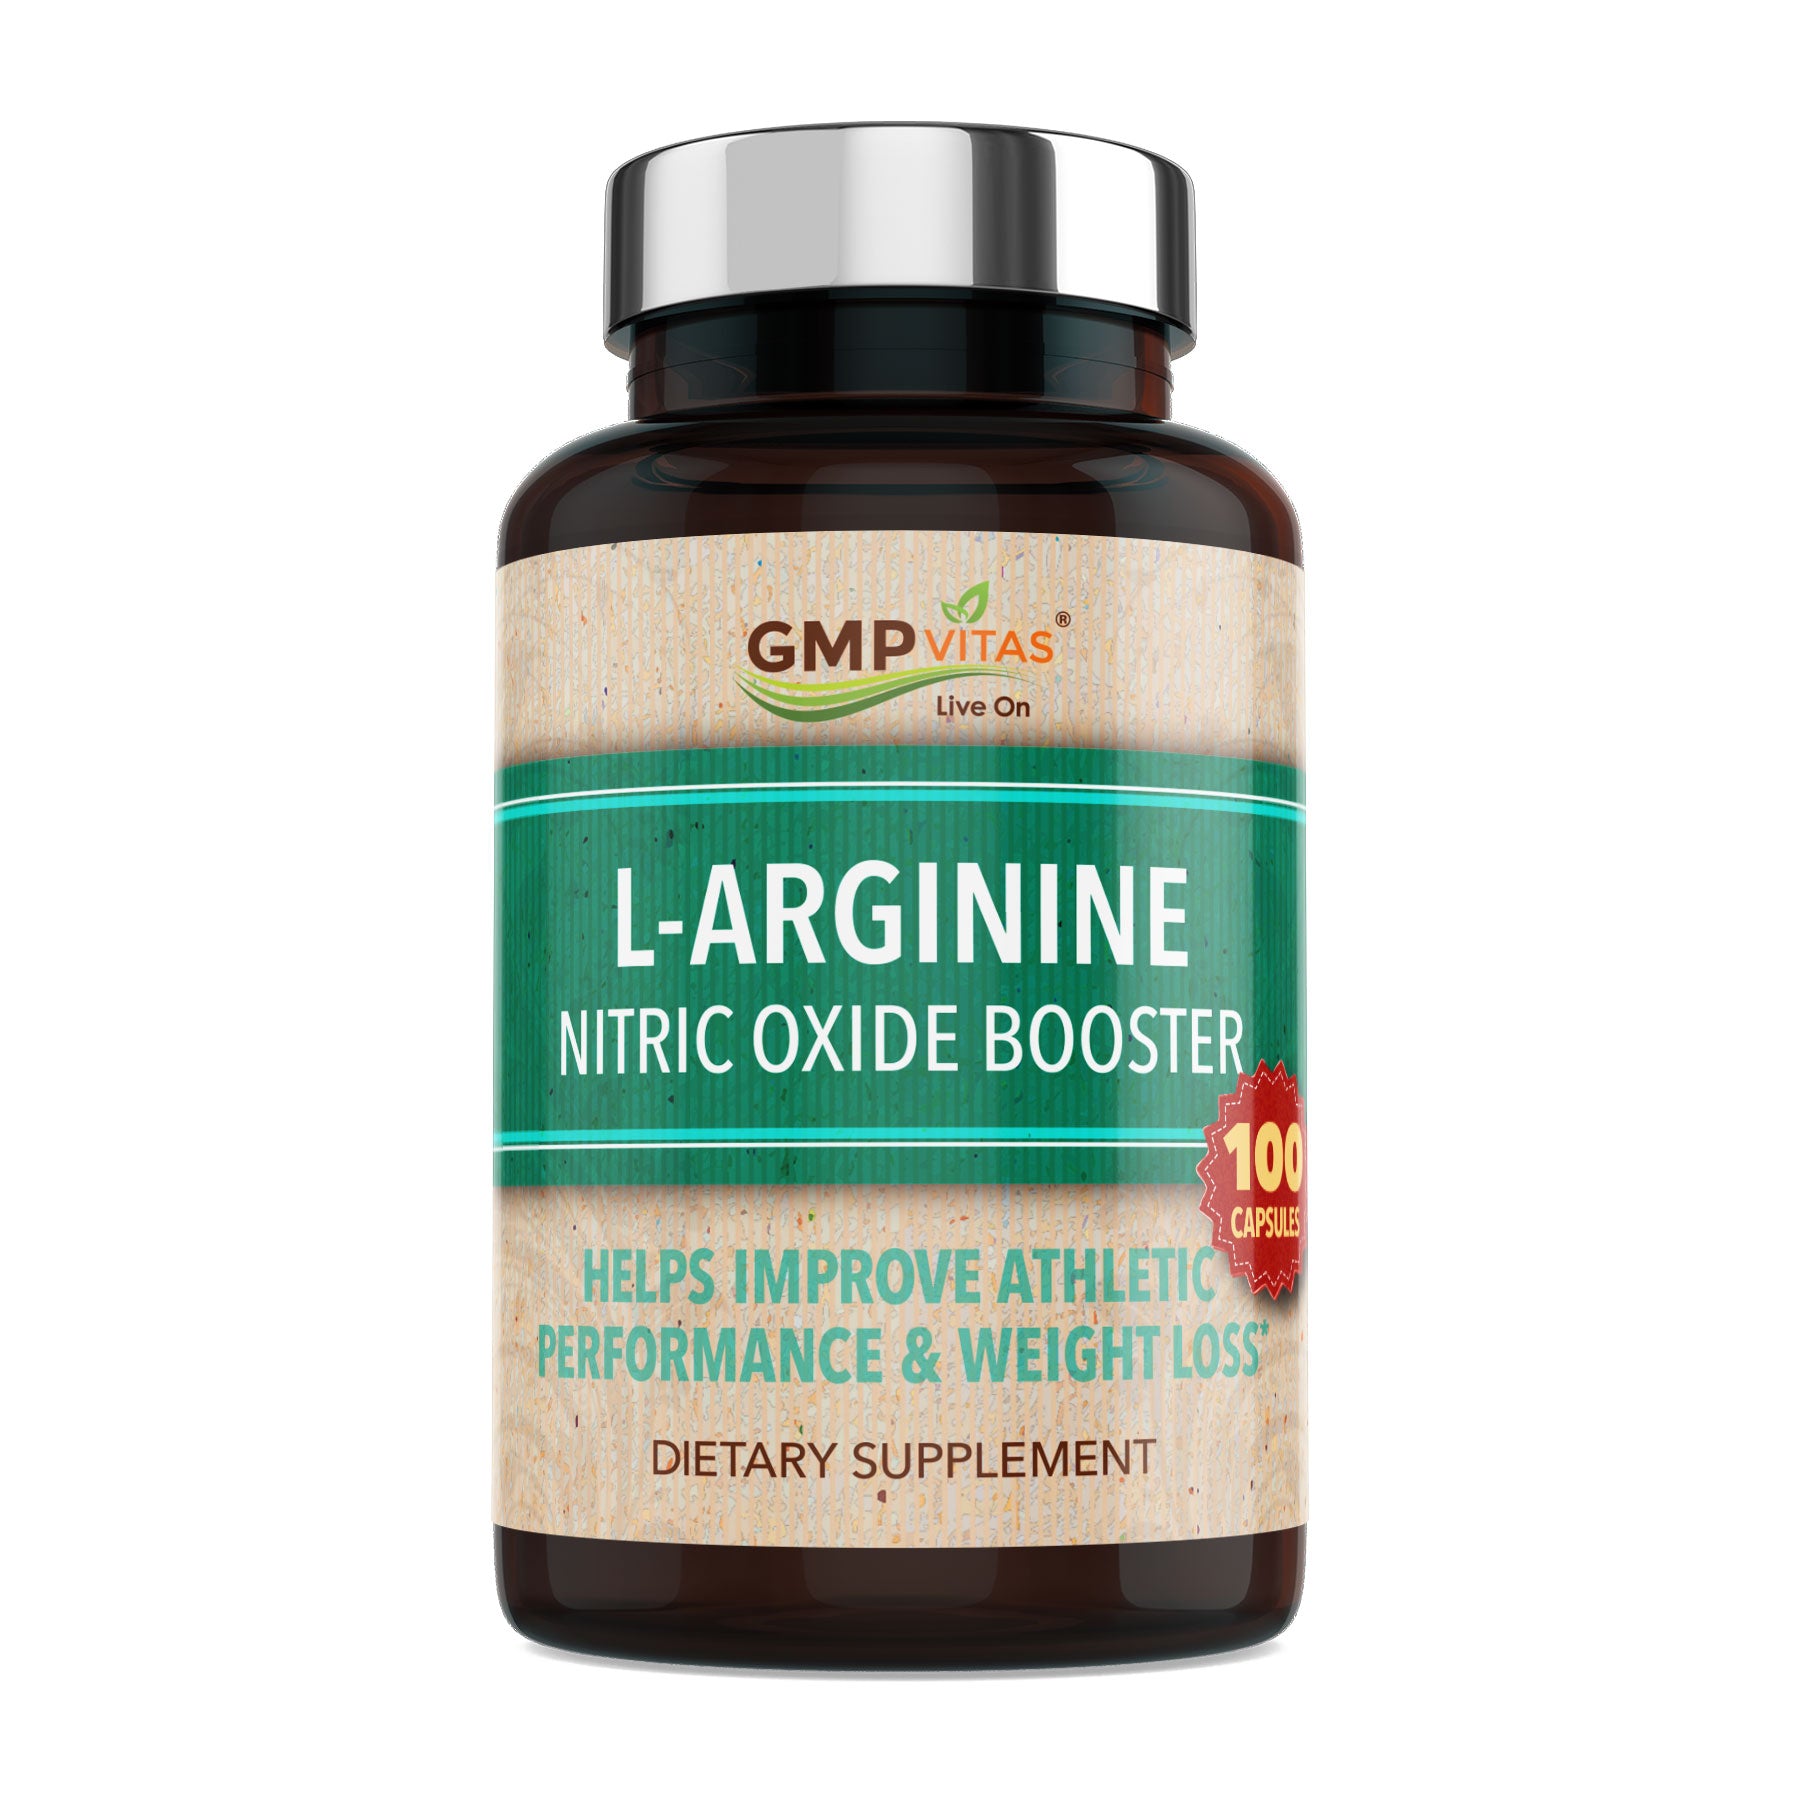 GMP Vitas® L-Arginine 100 Capsules, Nitric Oxide Booster that Helps Enhance Workout Performance